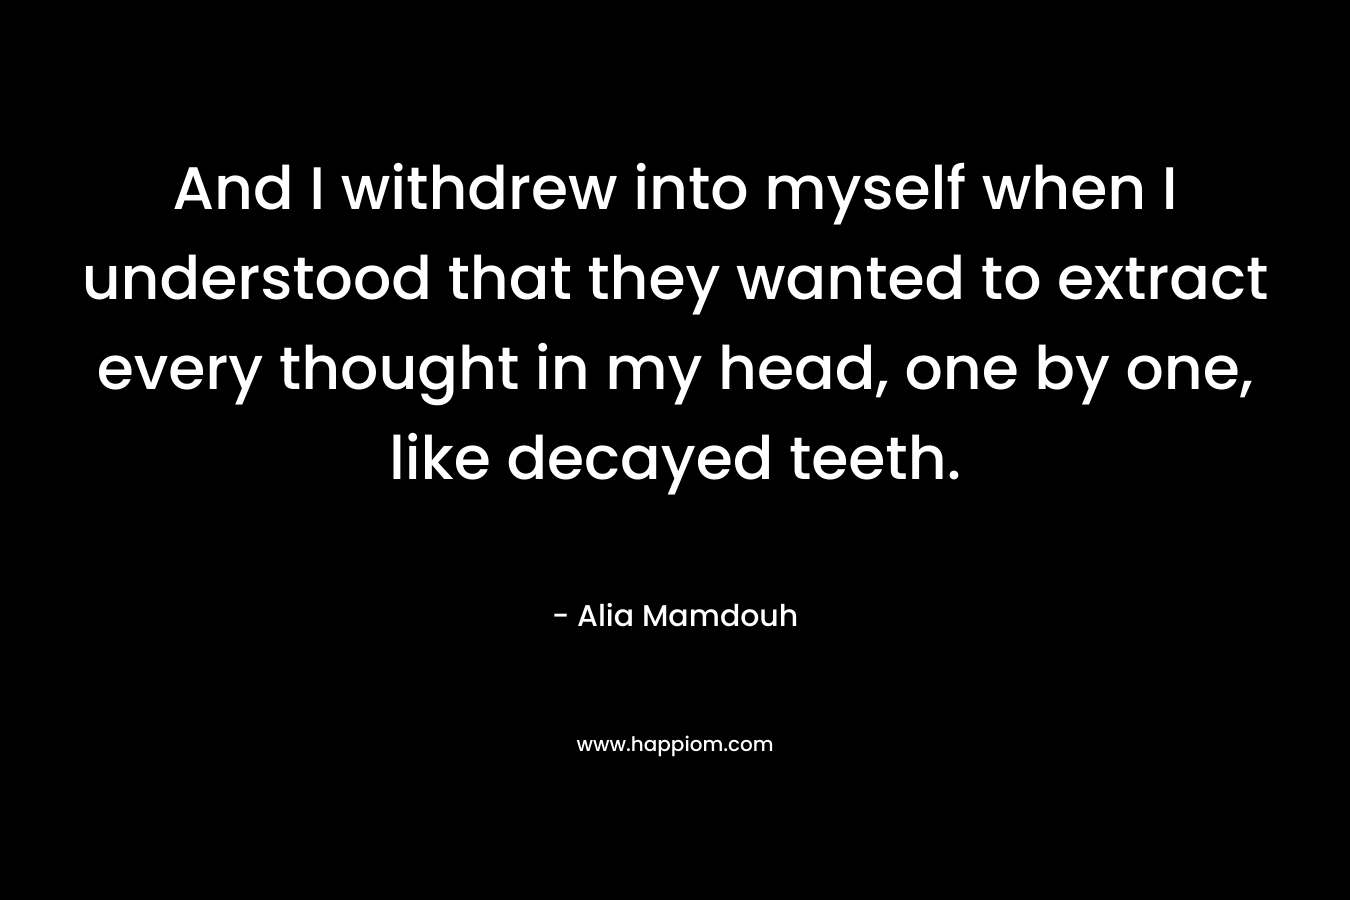 And I withdrew into myself when I understood that they wanted to extract every thought in my head, one by one, like decayed teeth. – Alia Mamdouh